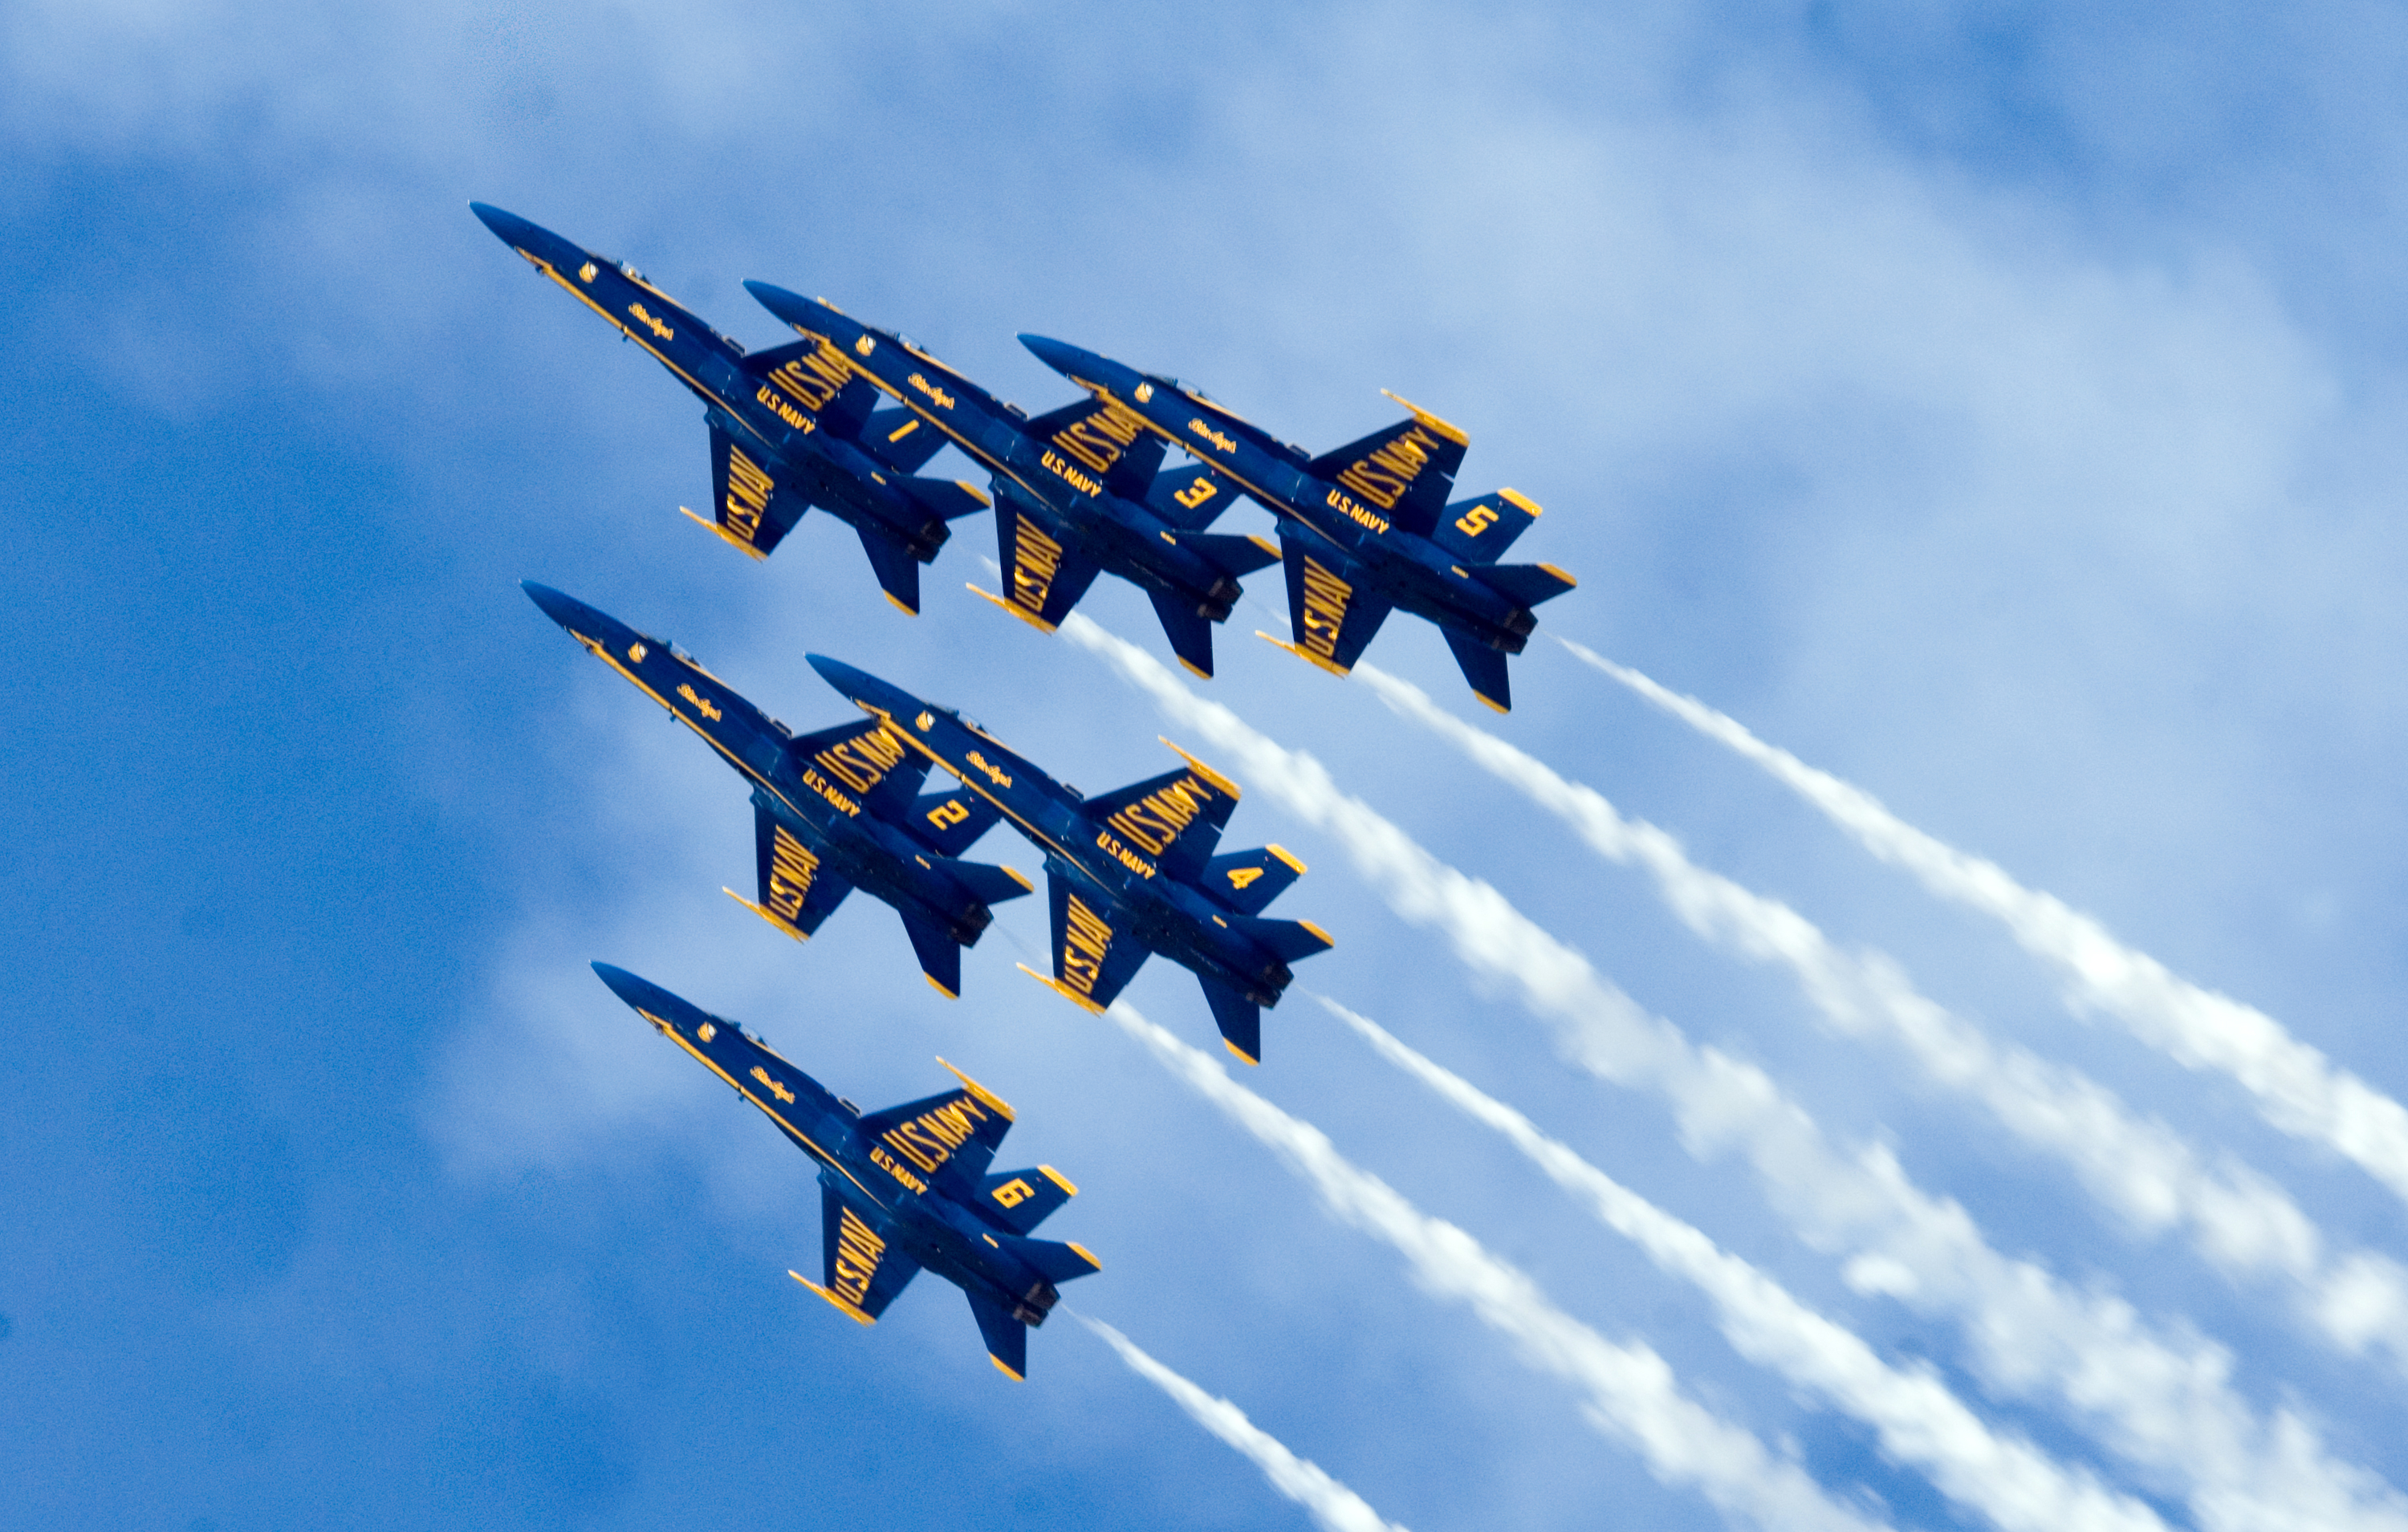 Blue Angels return to Fargo AirSho in 2018 | News | The Mighty 790 KFGO